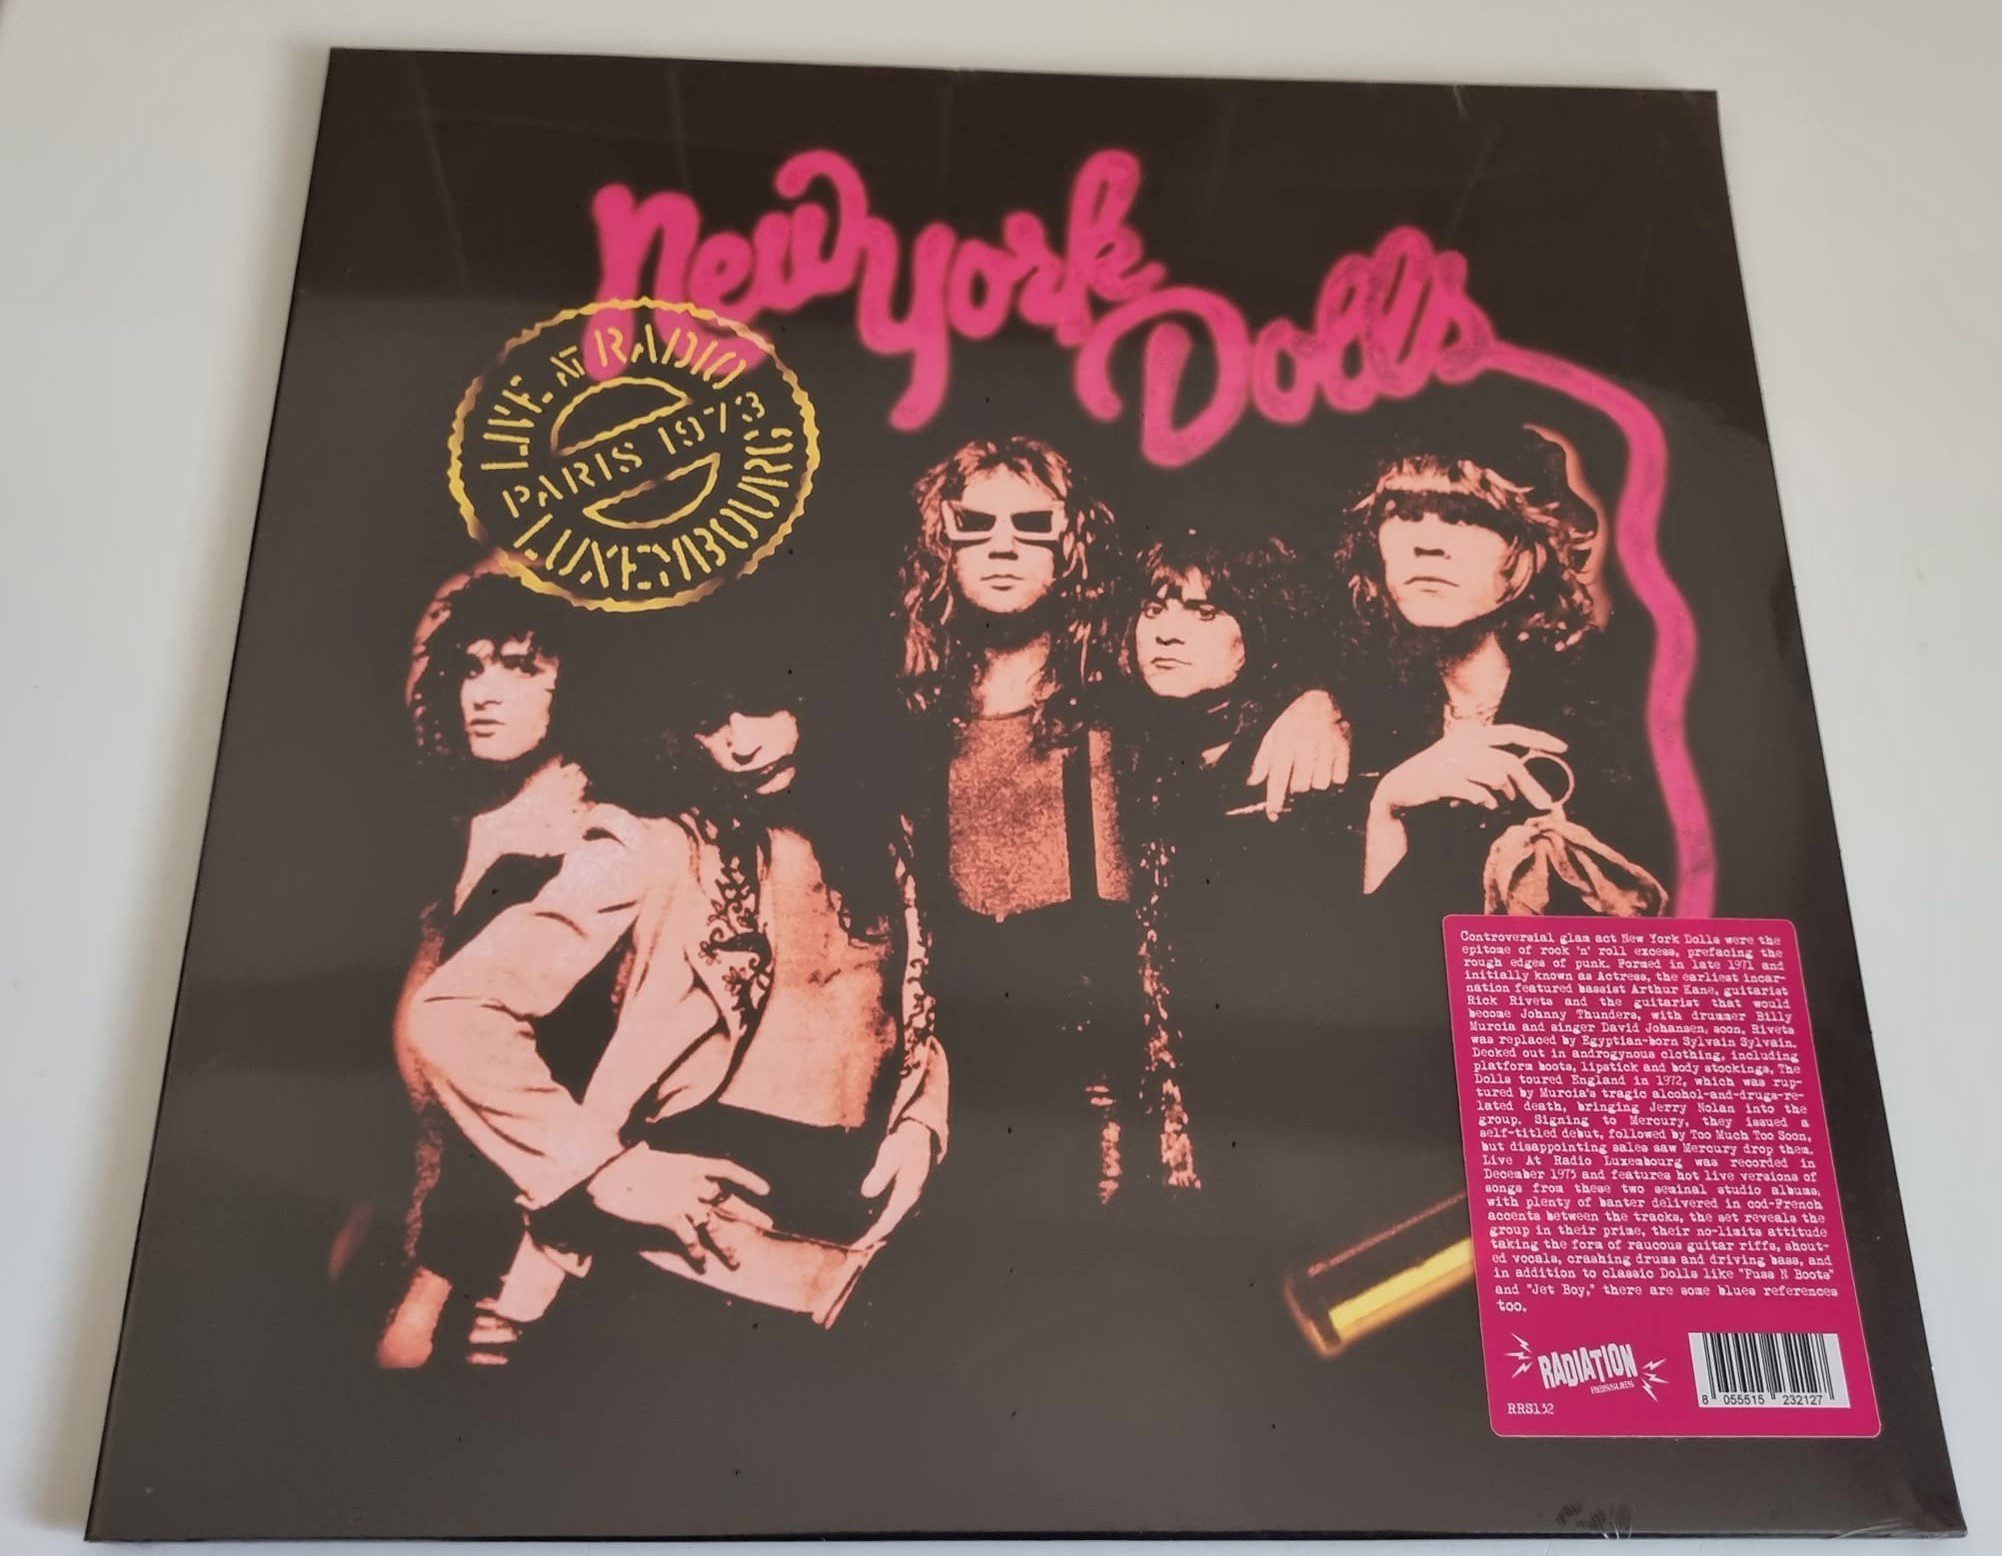 Buy this rare New York Dolls record by clicking here